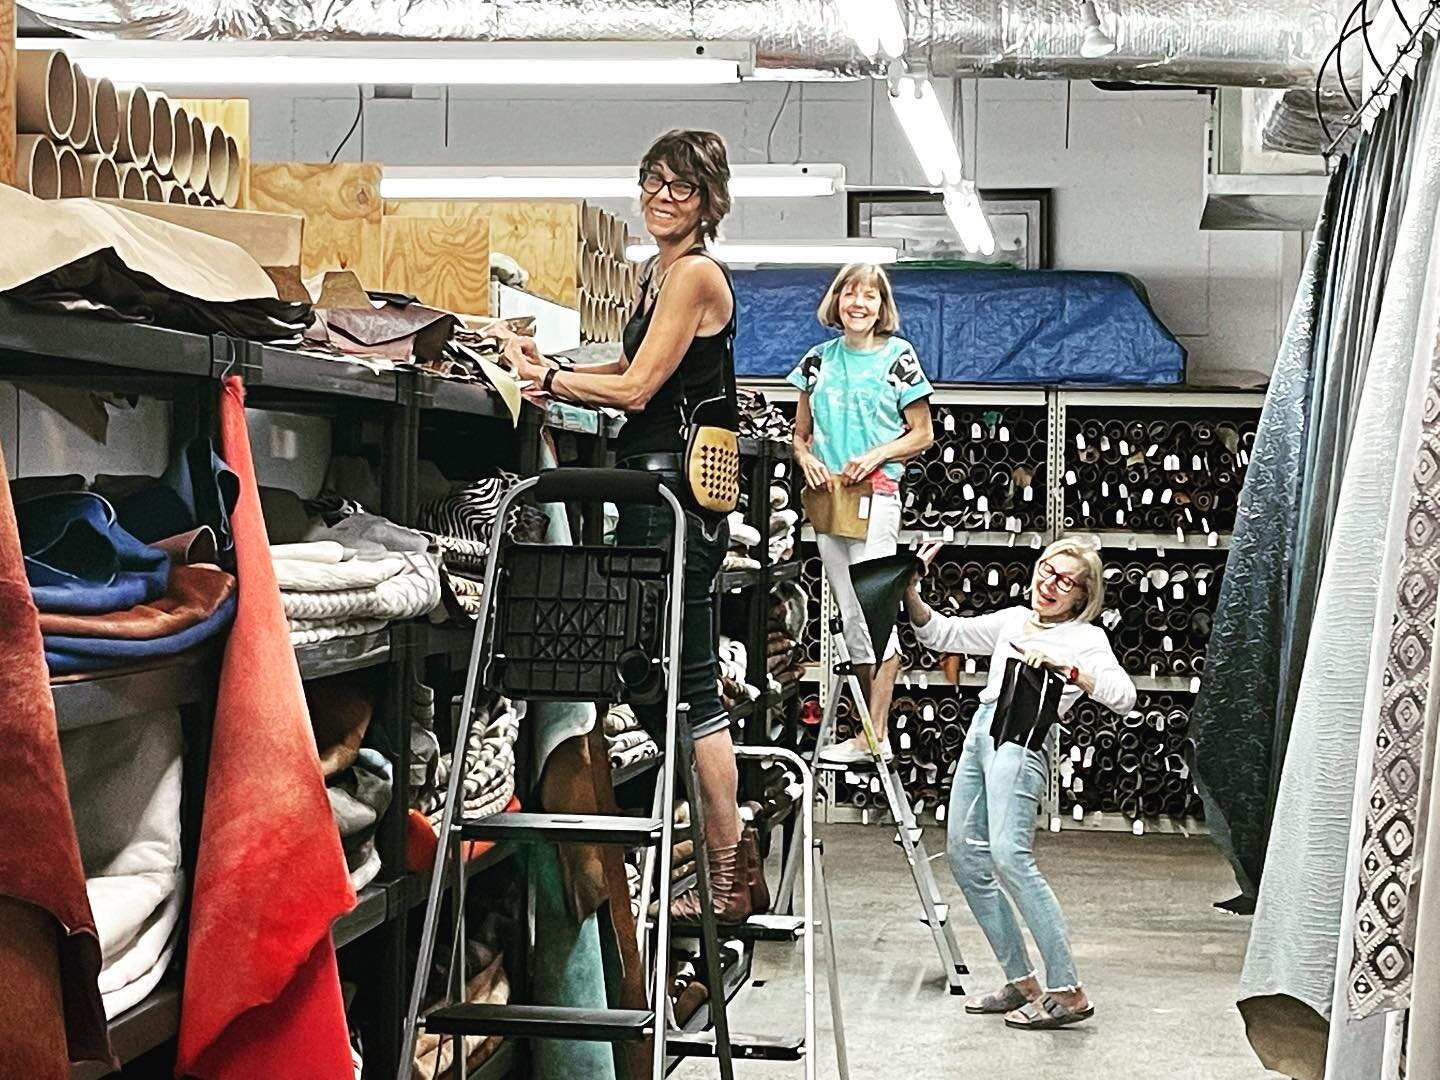 Got another one! The girls finding buried treasure in the Bellapelle Showroom! Schedule an appointment today to come by and see our collection. 

#bellapelleleather #bellapelle #leatherhide #leatherupholstery #leatherimports #interiordesign #leather 